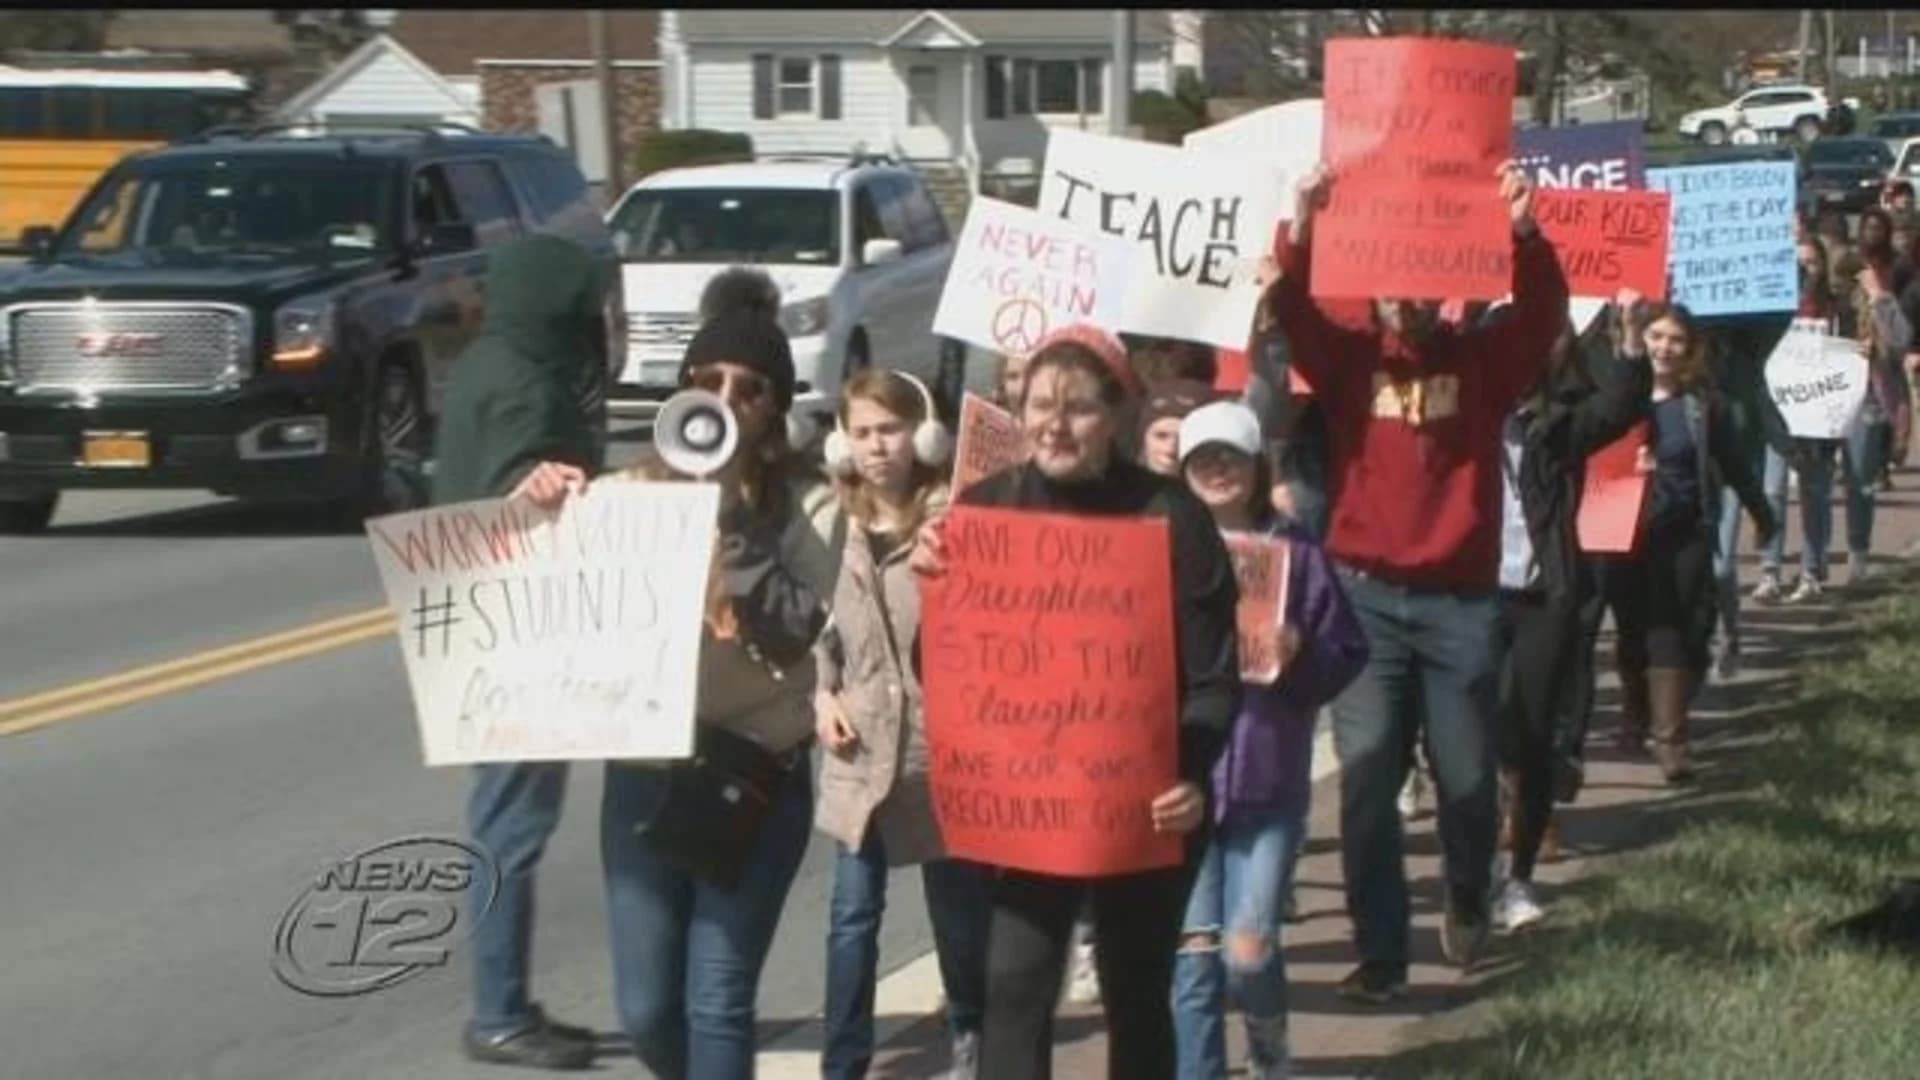 Warwick students join nationwide walkouts against gun violence